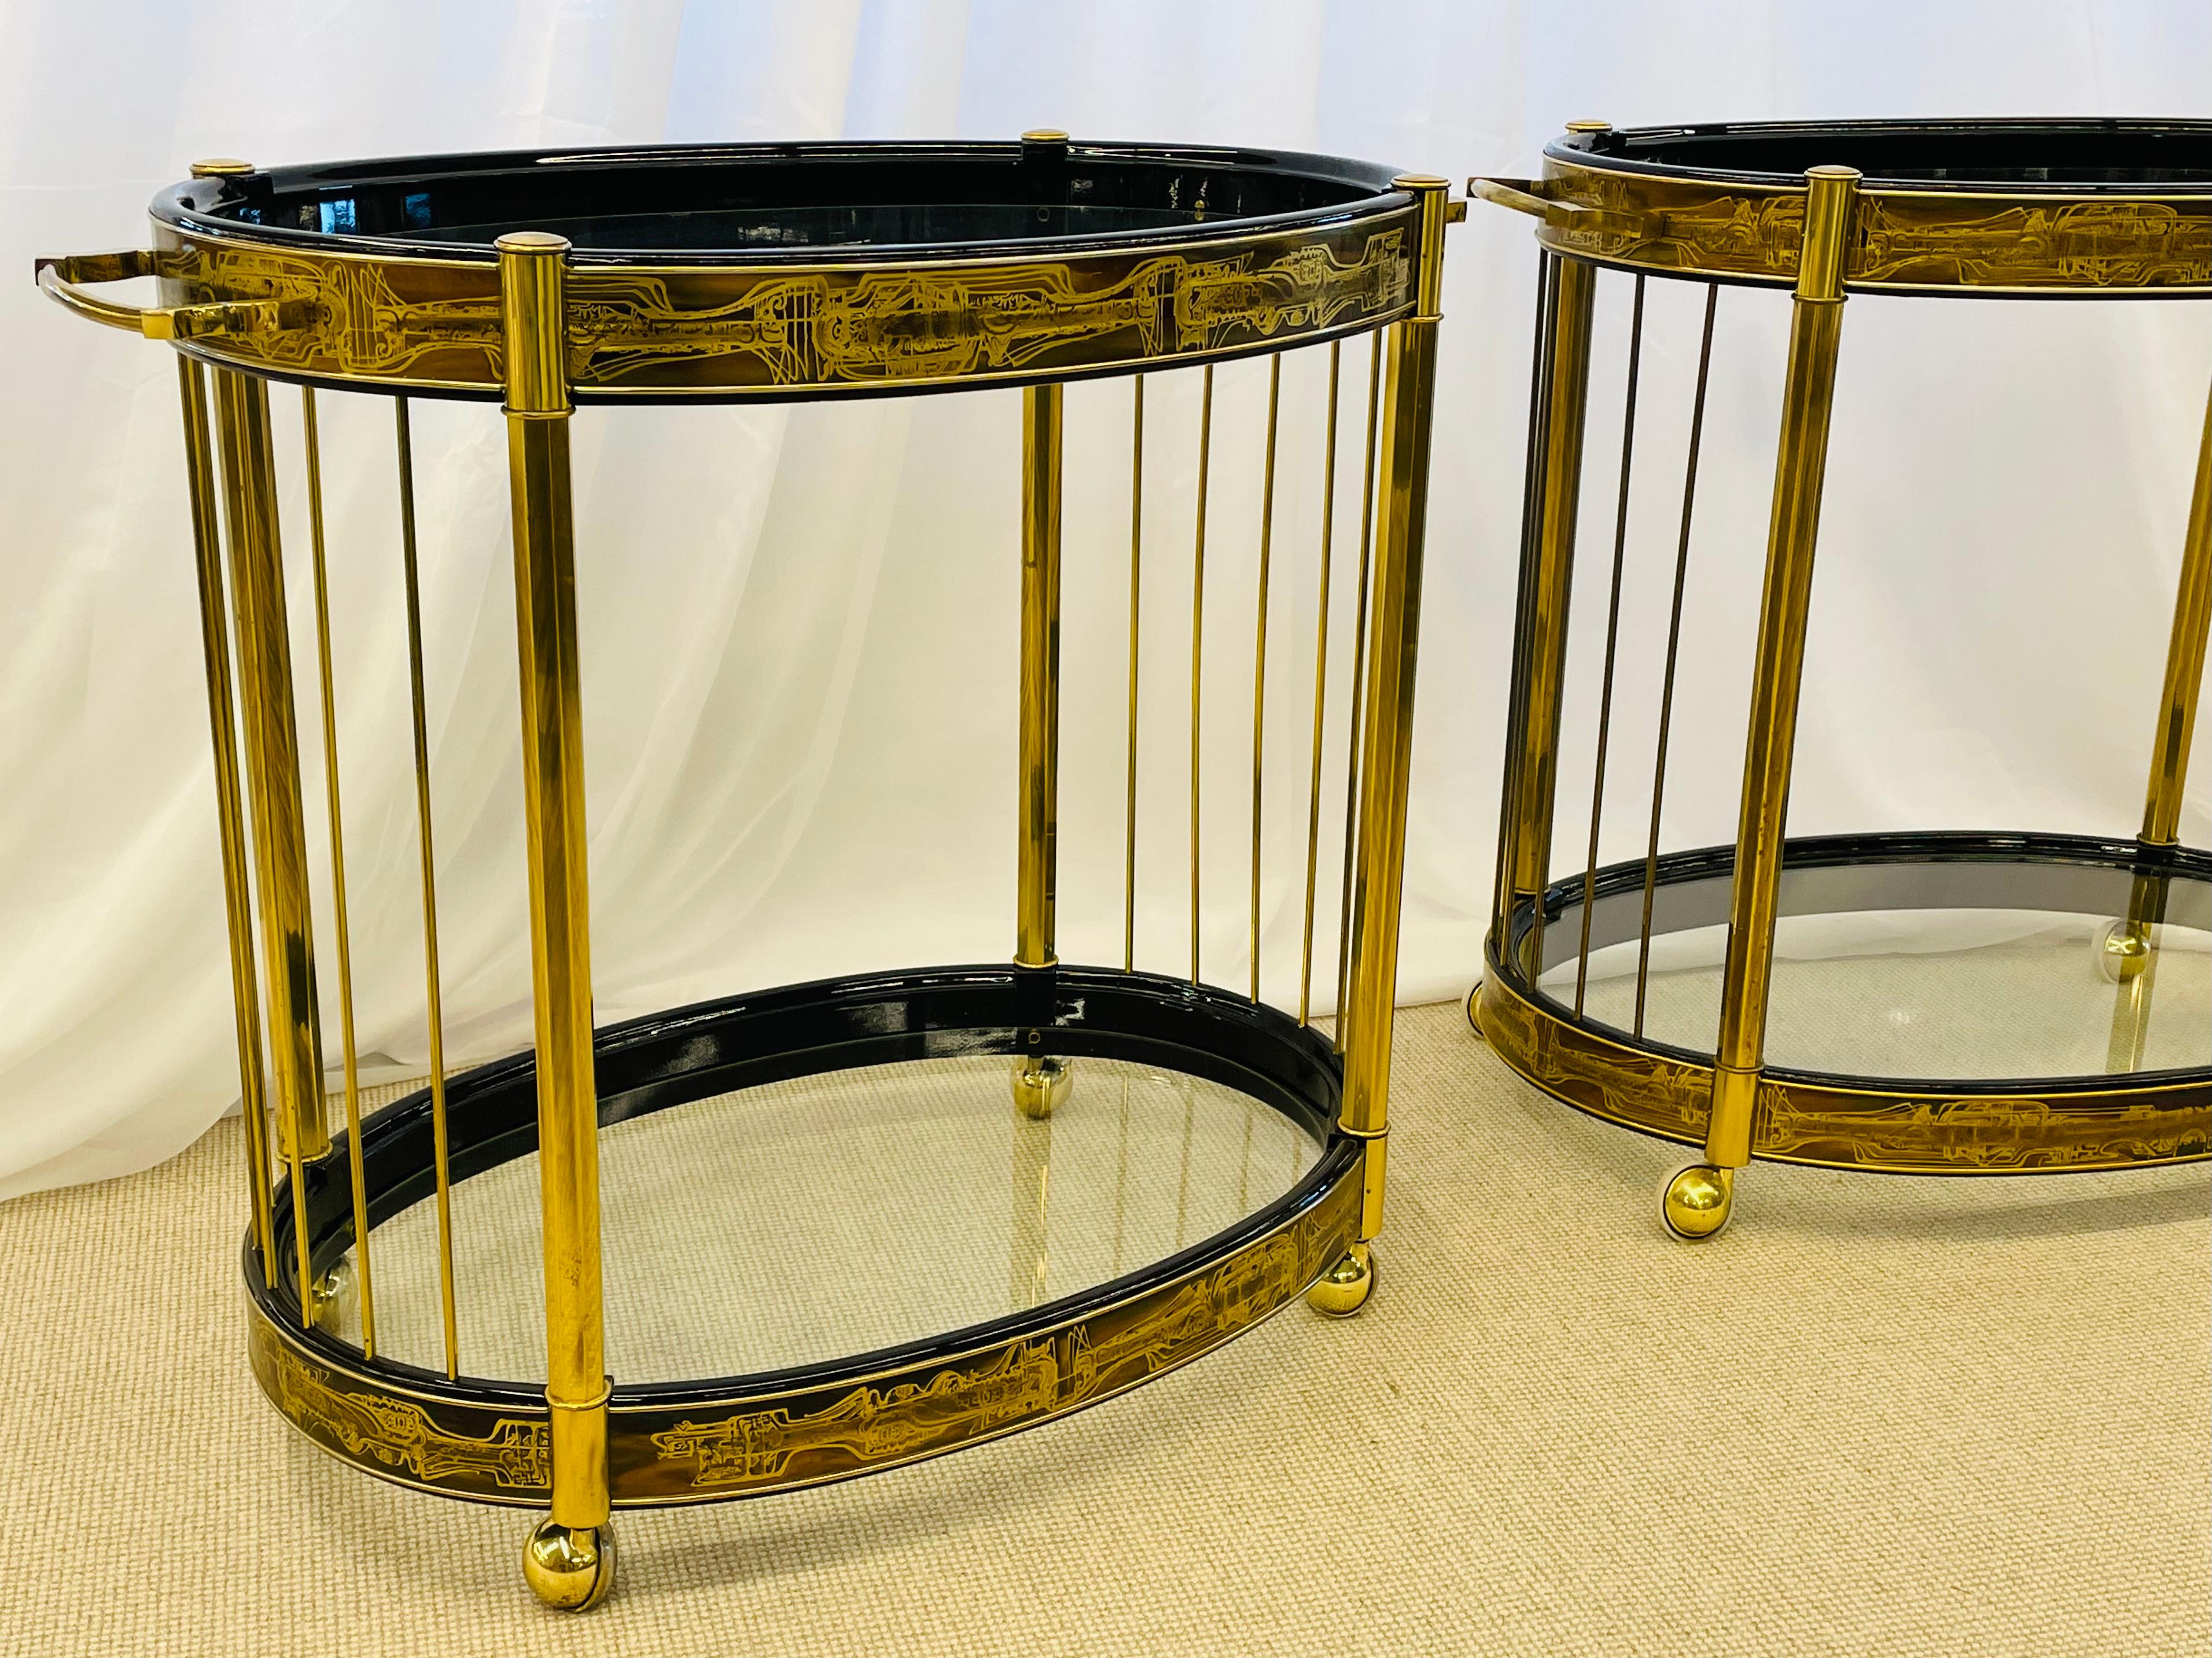 Mastercraft, Mid-Century Modern Serving Wagons, Gold Brass, Black Lacquer, 1960s For Sale 8